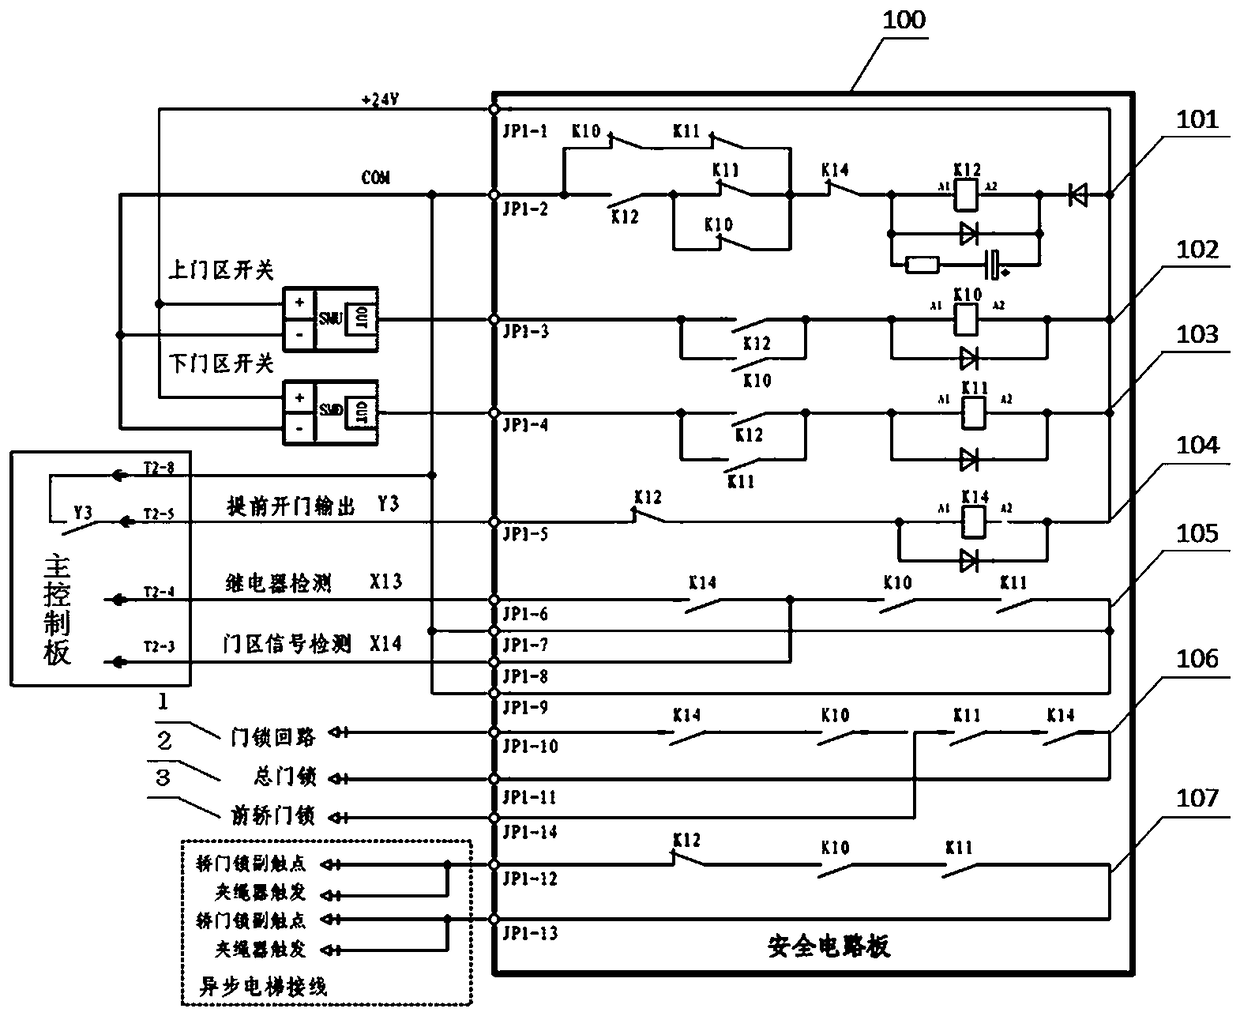 Universal multifunctional safety circuit board for synchronous and asynchronous elevators